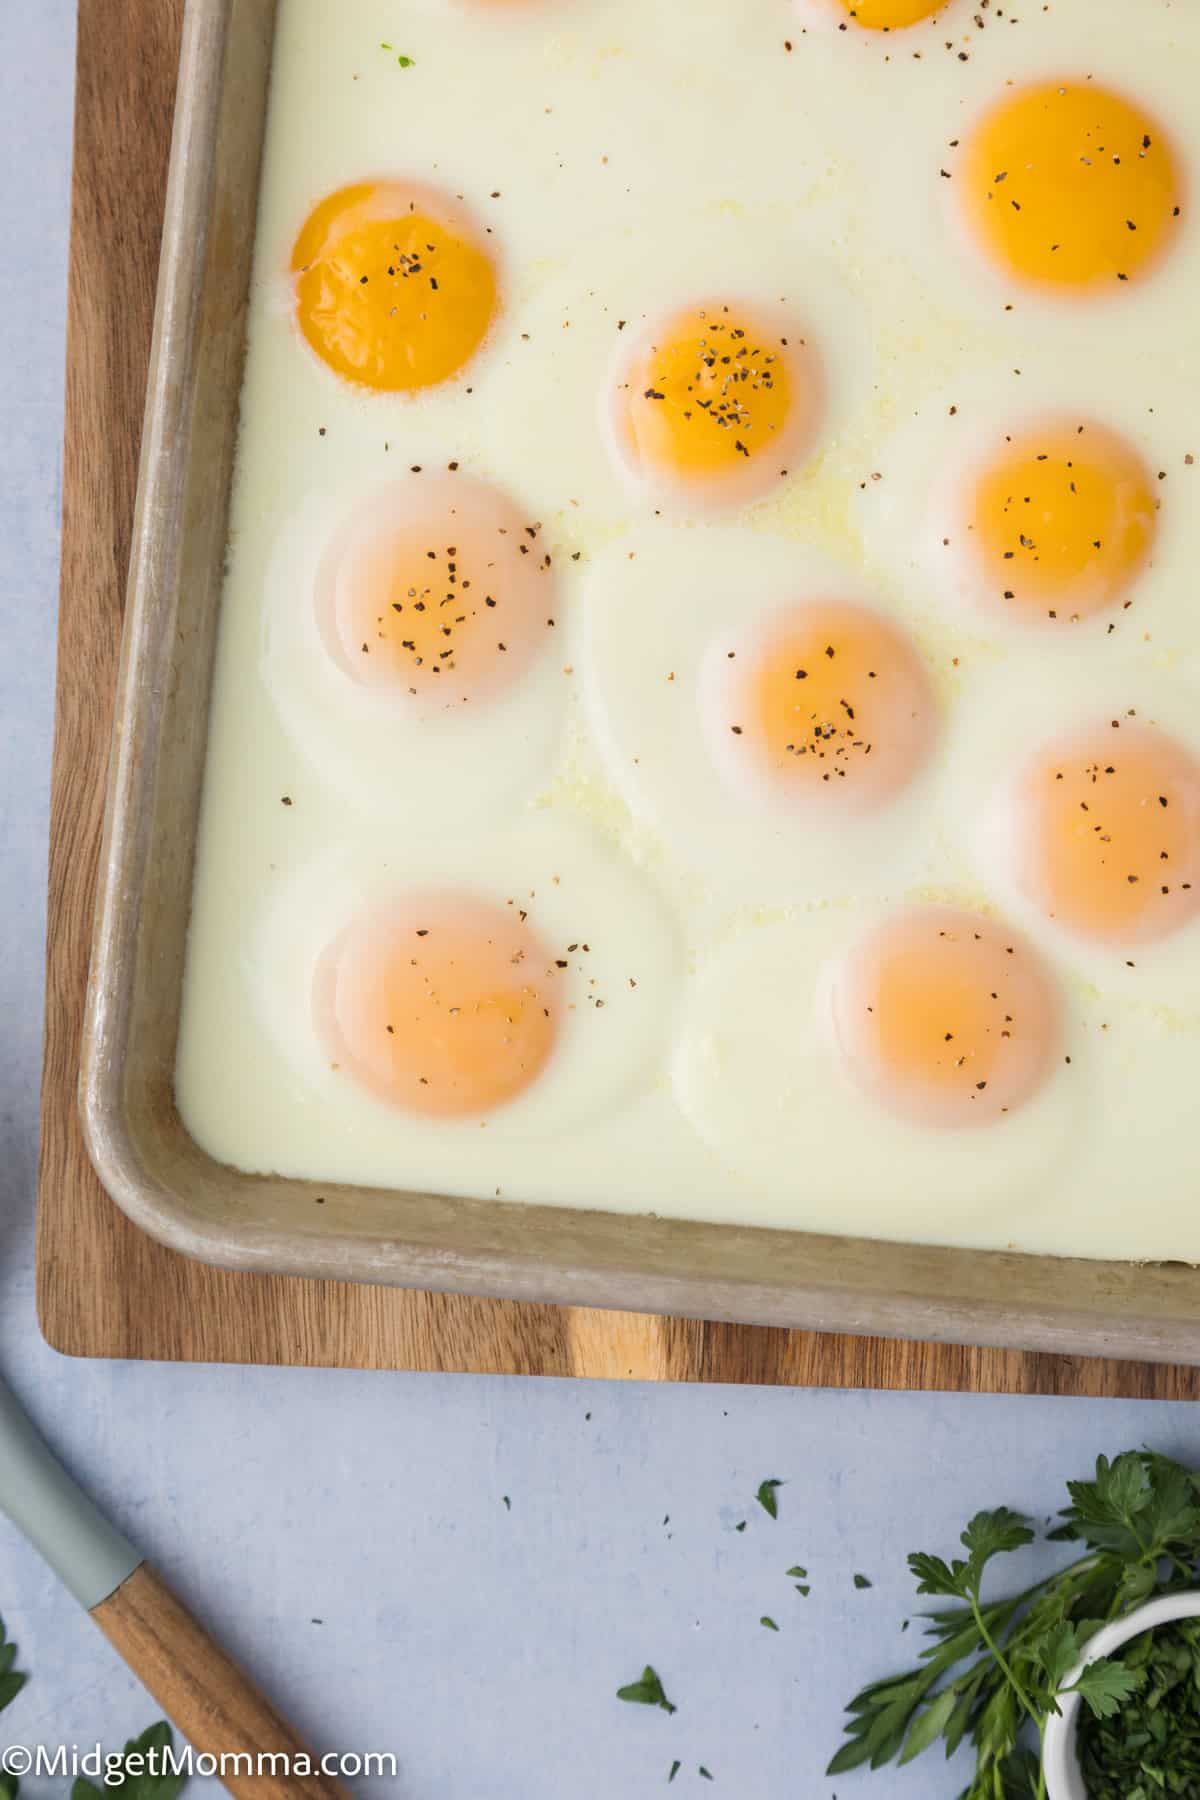 A baking sheet with eleven evenly spaced, sunny-side-up eggs sprinkled with black pepper. A knife and some fresh herbs are visible in the bottom left corner.